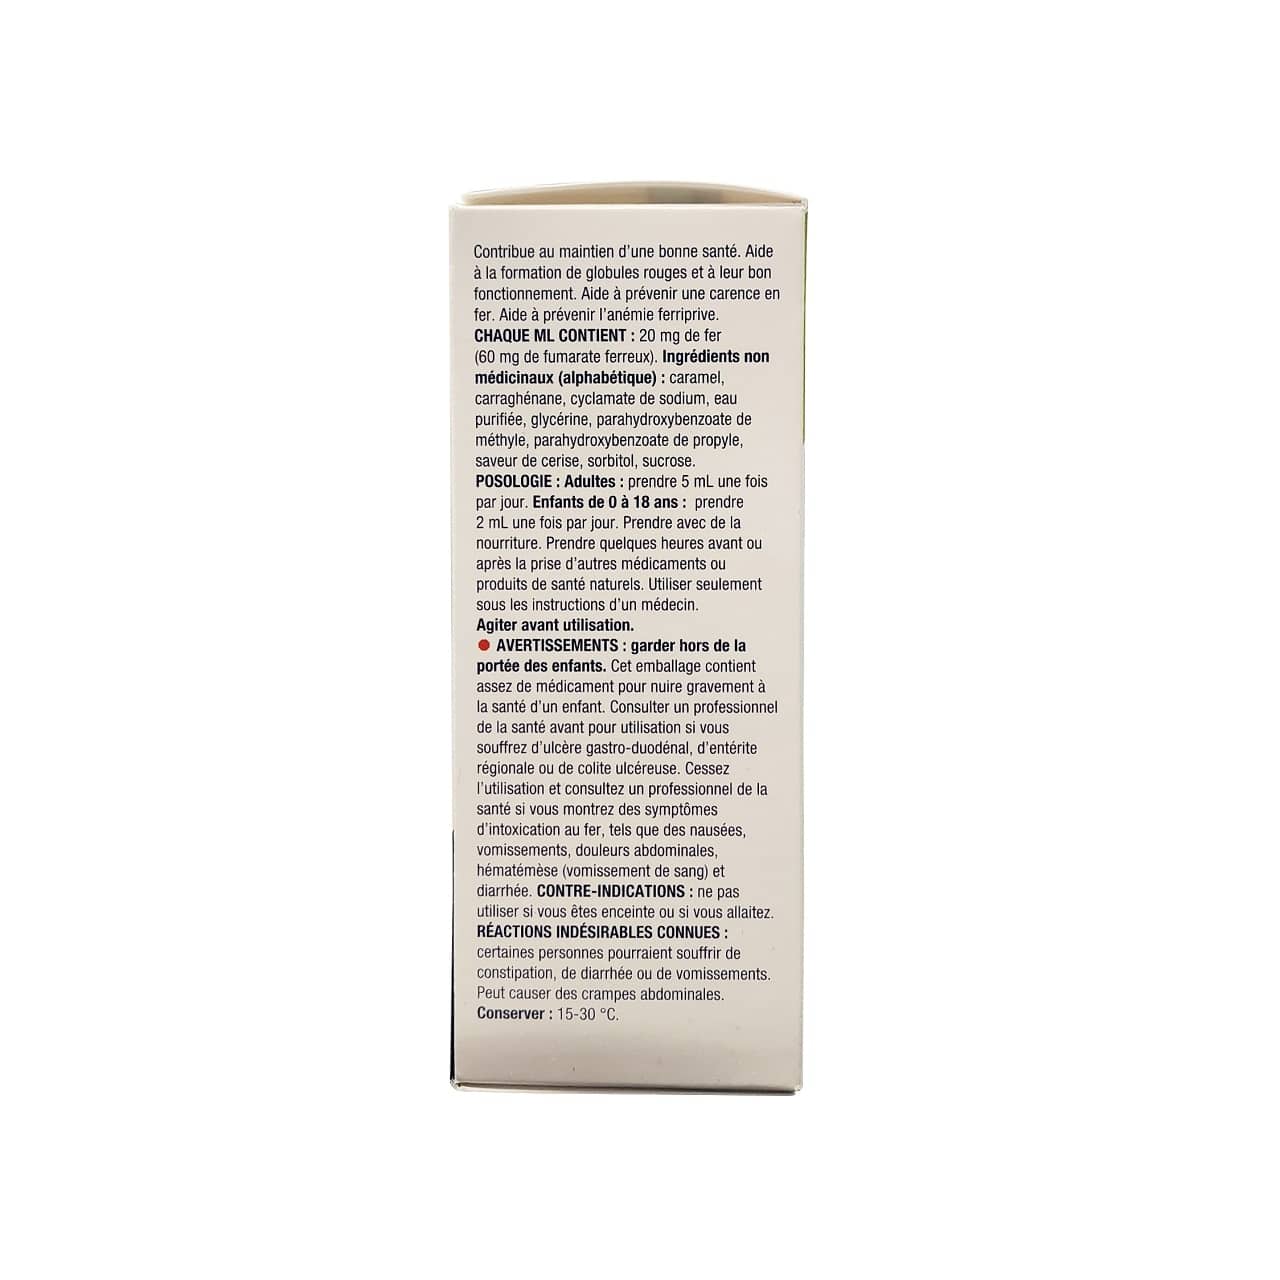 Description, ingredients, dose, warnings for JAMP Ferrous Fumarate Liquid 60 mg/mL (100 mL) in French